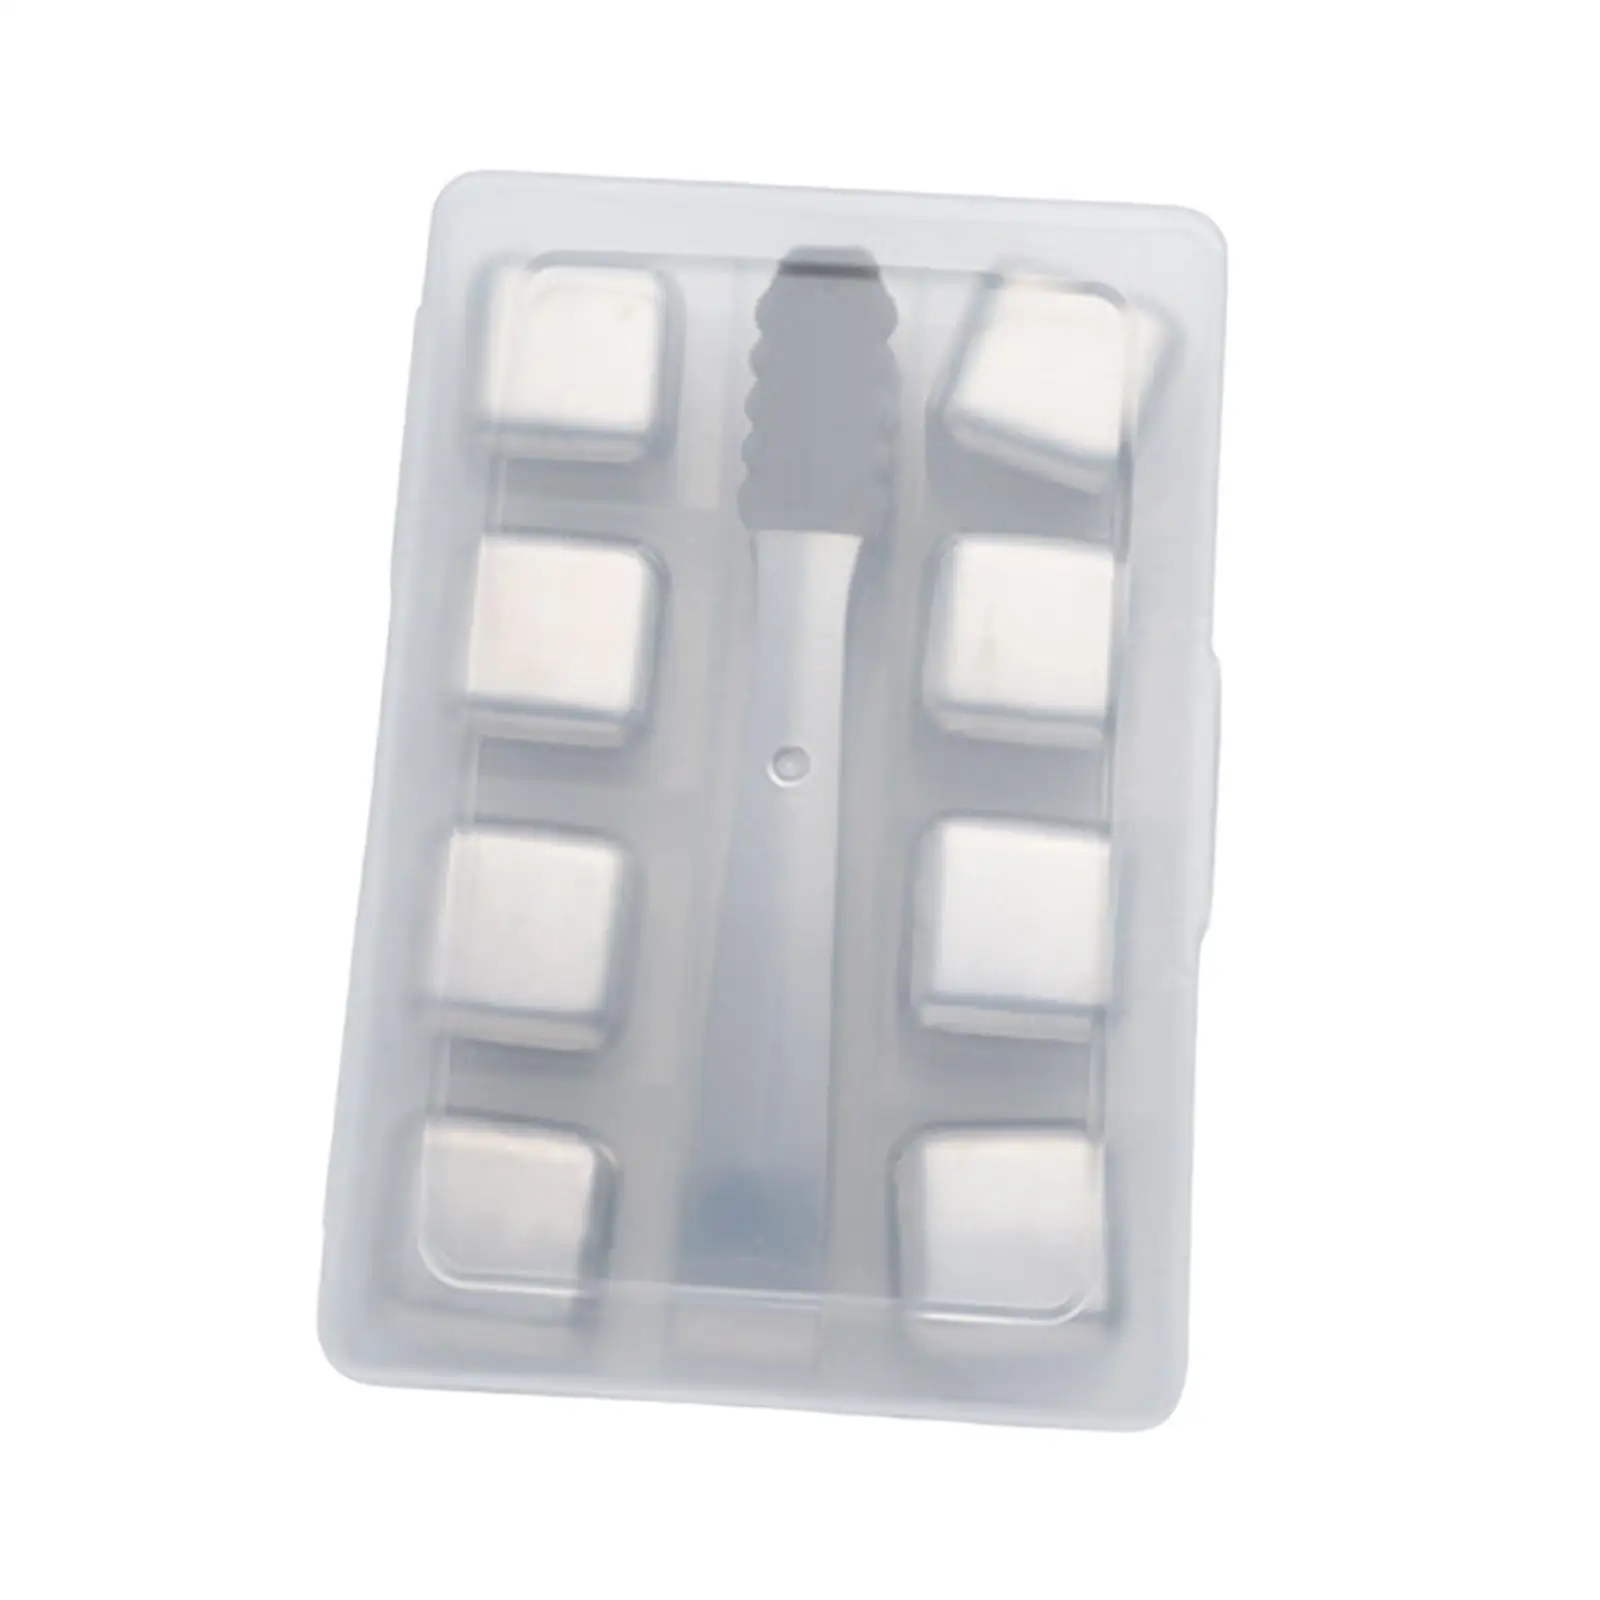 Stainless Steel Ice Cubes Reusable 2.5cm Drinks Chilling Stones Ice Cubes for Cocktail Juice Whisky Wedding Home